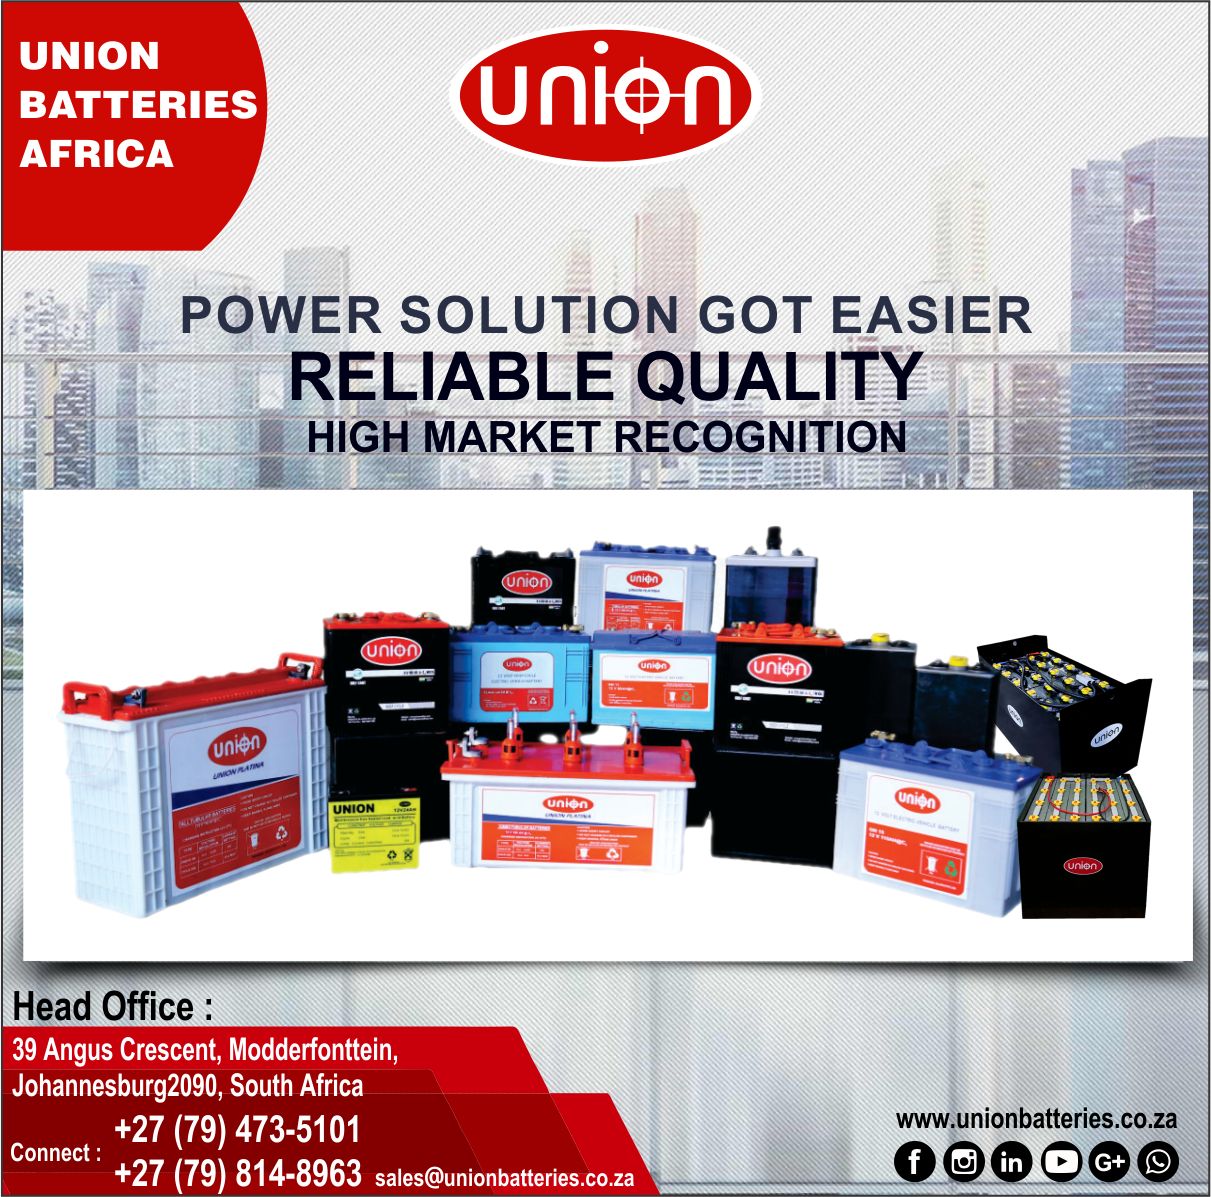 Commercial & Industrial Equipment Supplier of Batteries